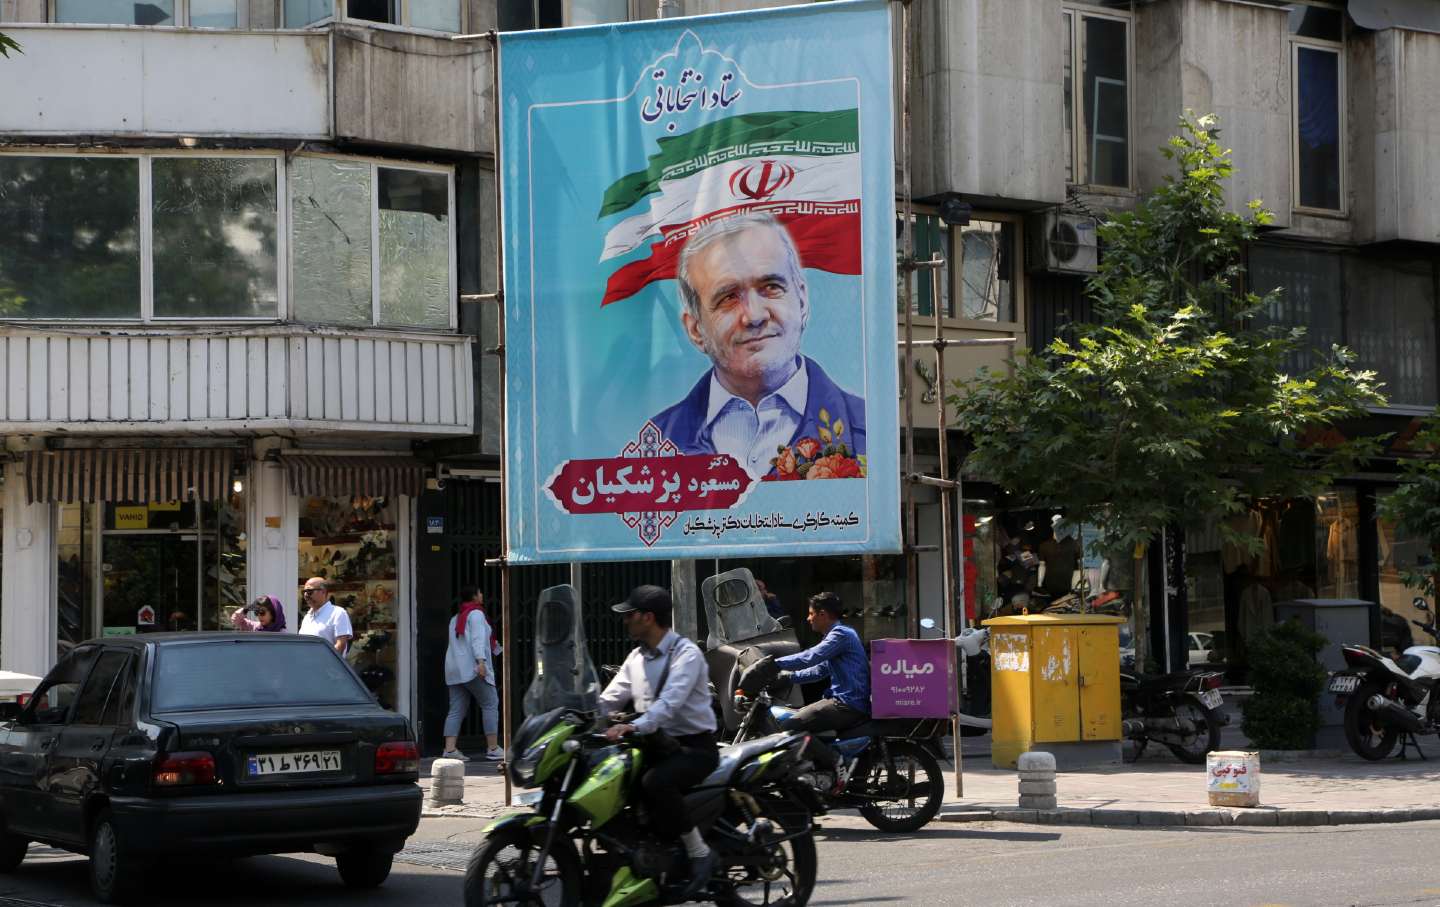 Posters of candidates are hung on streets in Tehran ahead of Iran's presidential elections scheduled to be held on June 28.